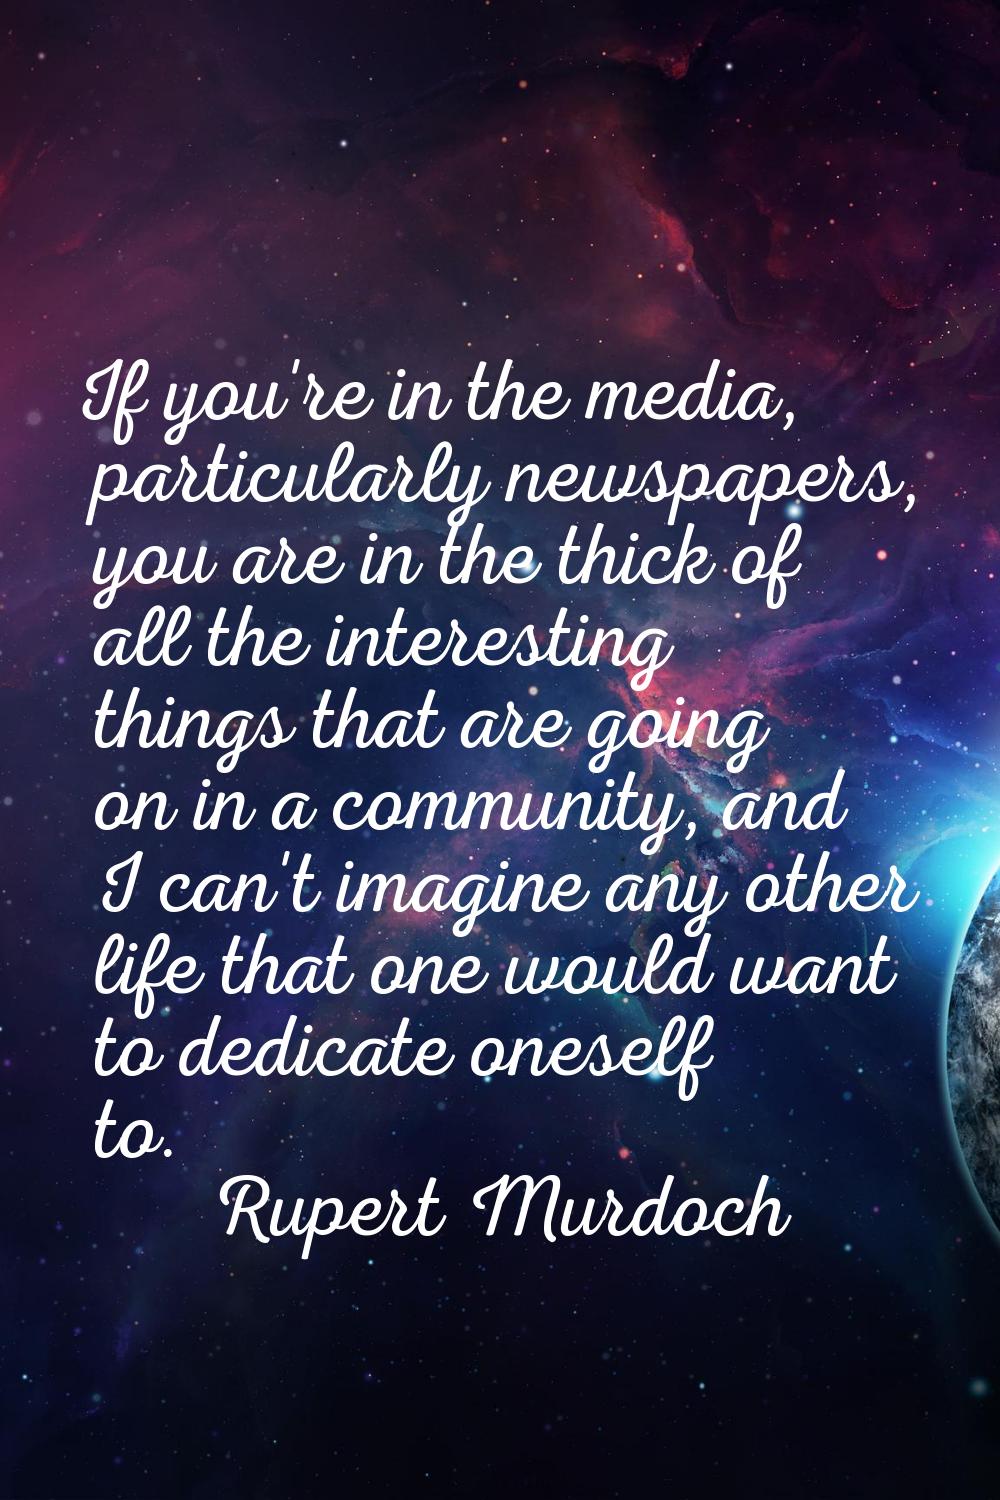 If you're in the media, particularly newspapers, you are in the thick of all the interesting things